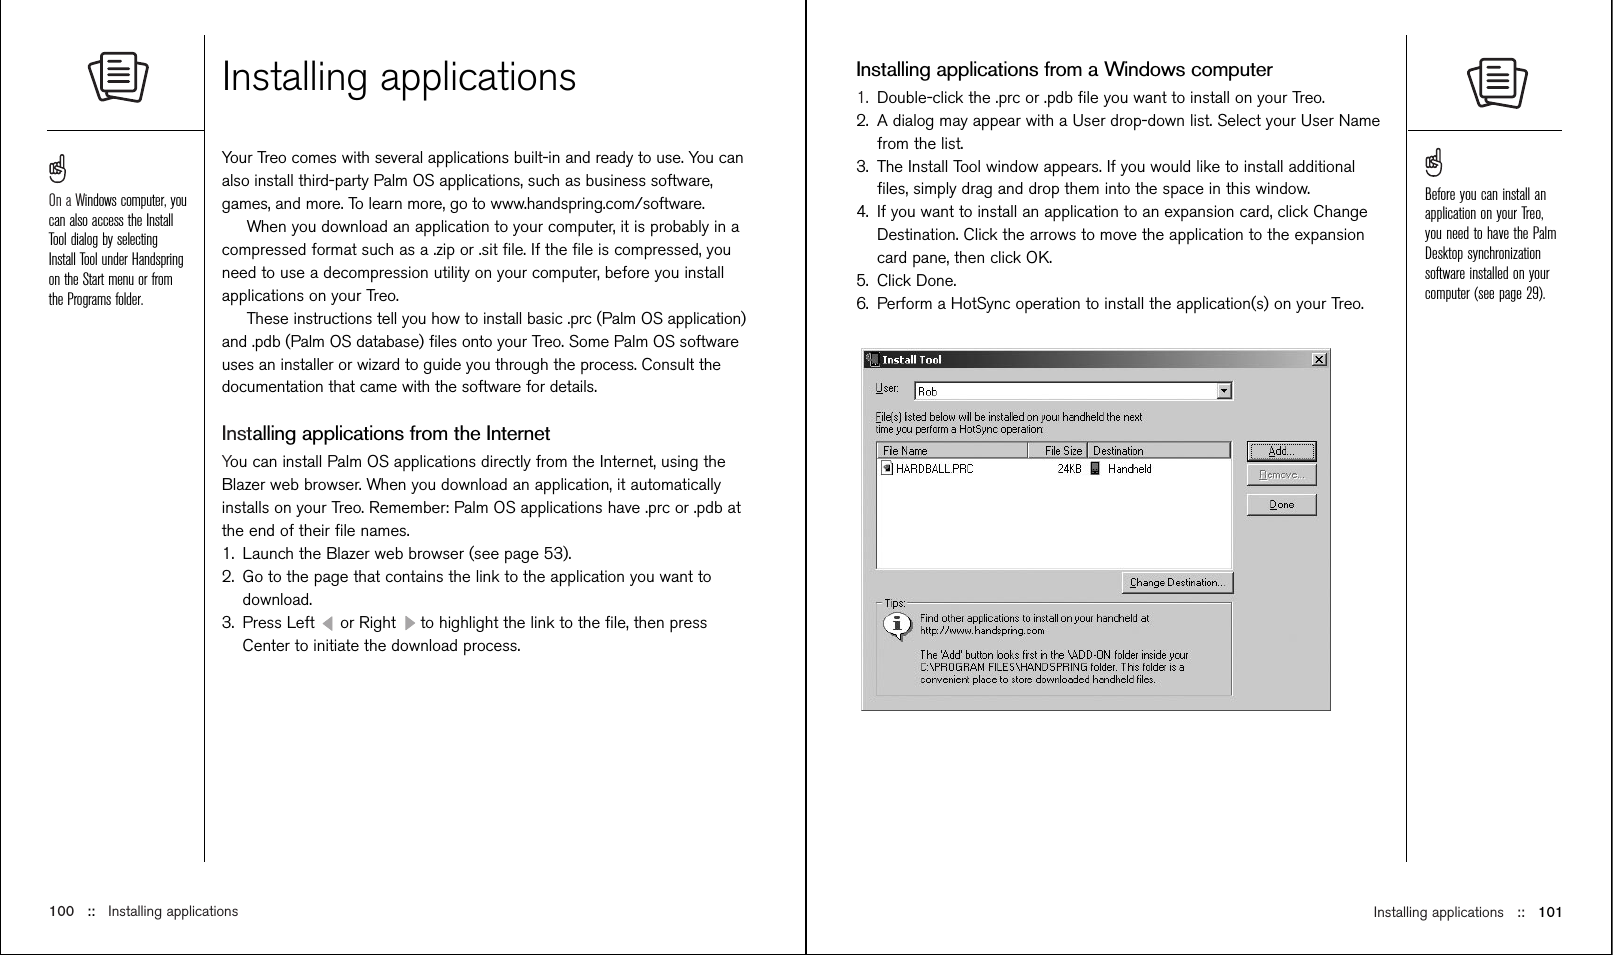 Installing applications ::   101Installing applications from a Windows computer1. Double-click the .prc or .pdb ﬁle you want to install on your Treo.2. A dialog may appear with a User drop-down list. Select your User Namefrom the list.3. The Install Tool window appears. If you would like to install additionalﬁles, simply drag and drop them into the space in this window.4. If you want to install an application to an expansion card, click ChangeDestination. Click the arrows to move the application to the expansioncard pane, then click OK.5. Click Done.6. Perform a HotSync operation to install the application(s) on your Treo.Installing applicationsYour Treo comes with several applications built-in and ready to use. You canalso install third-party Palm OS applications, such as business software,games, and more. To learn more, go to www.handspring.com/software.When you download an application to your computer, it is probably in acompressed format such as a .zip or .sit ﬁle. If the ﬁle is compressed, youneed to use a decompression utility on your computer, before you installapplications on your Treo. These instructions tell you how to install basic .prc (Palm OS application)and .pdb (Palm OS database) ﬁles onto your Treo. Some Palm OS softwareuses an installer or wizard to guide you through the process. Consult thedocumentation that came with the software for details.Installing applications from the InternetYou can install Palm OS applications directly from the Internet, using theBlazer web browser. When you download an application, it automaticallyinstalls on your Treo. Remember: Palm OS applications have .prc or .pdb atthe end of their ﬁle names.1. Launch the Blazer web browser (see page 53).2. Go to the page that contains the link to the application you want todownload.3. Press Left  or Right  to highlight the link to the ﬁle, then pressCenter to initiate the download process.100 ::   Installing applicationsOn a Windows computer, youcan also access the InstallTool dialog by selectingInstall Tool under Handspringon the Start menu or fromthe Programs folder.Before you can install anapplication on your Treo,you need to have the PalmDesktop synchronizationsoftware installed on yourcomputer (see page 29).